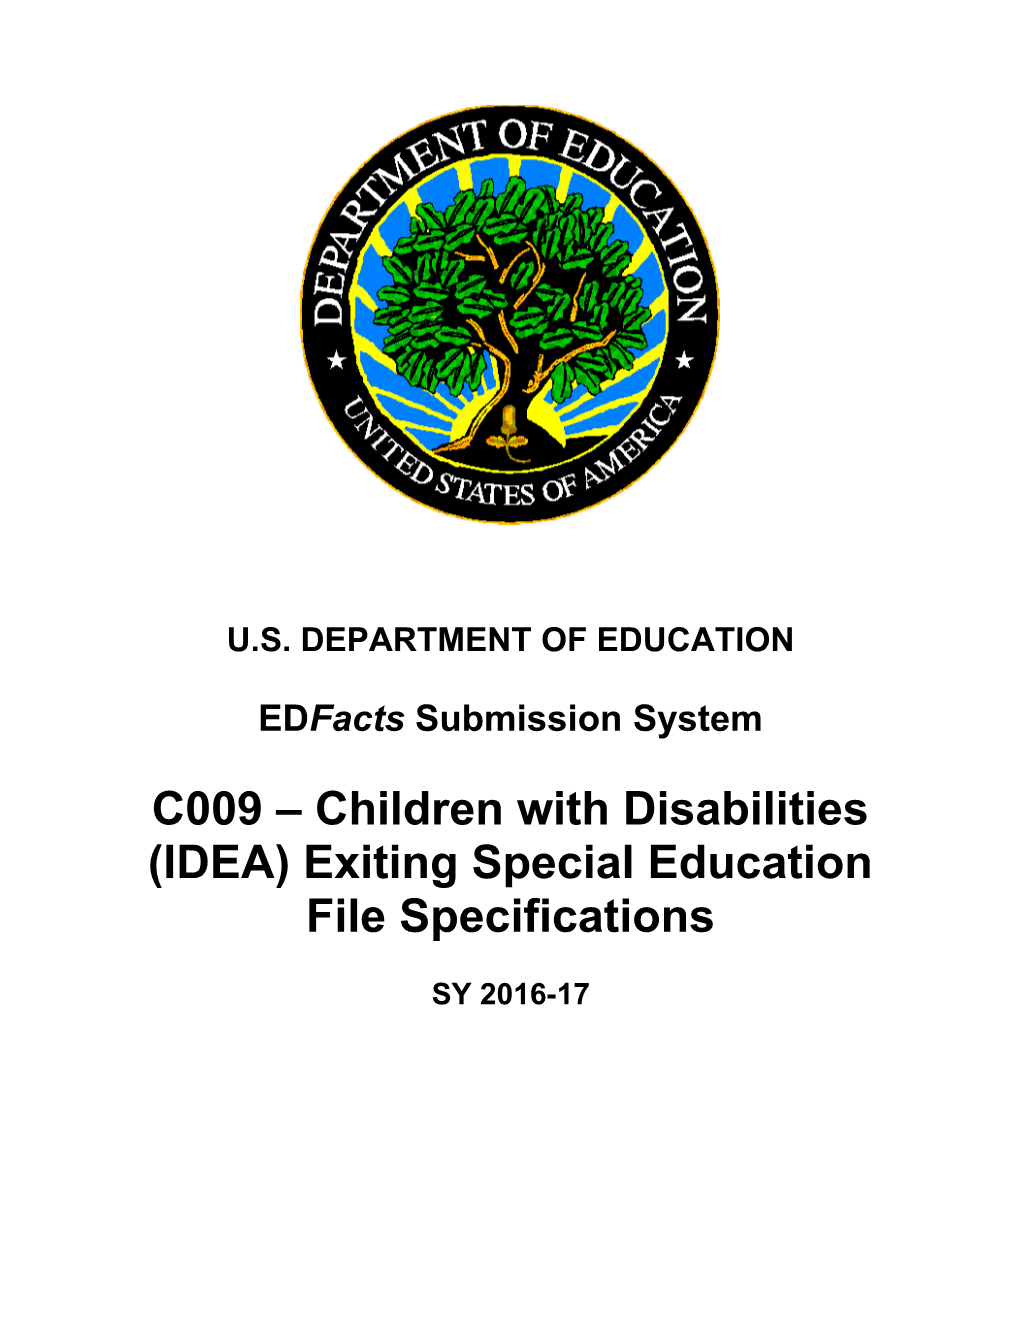 Children with Disabilities (IDEA) Exiting Special Education File Specifications s1